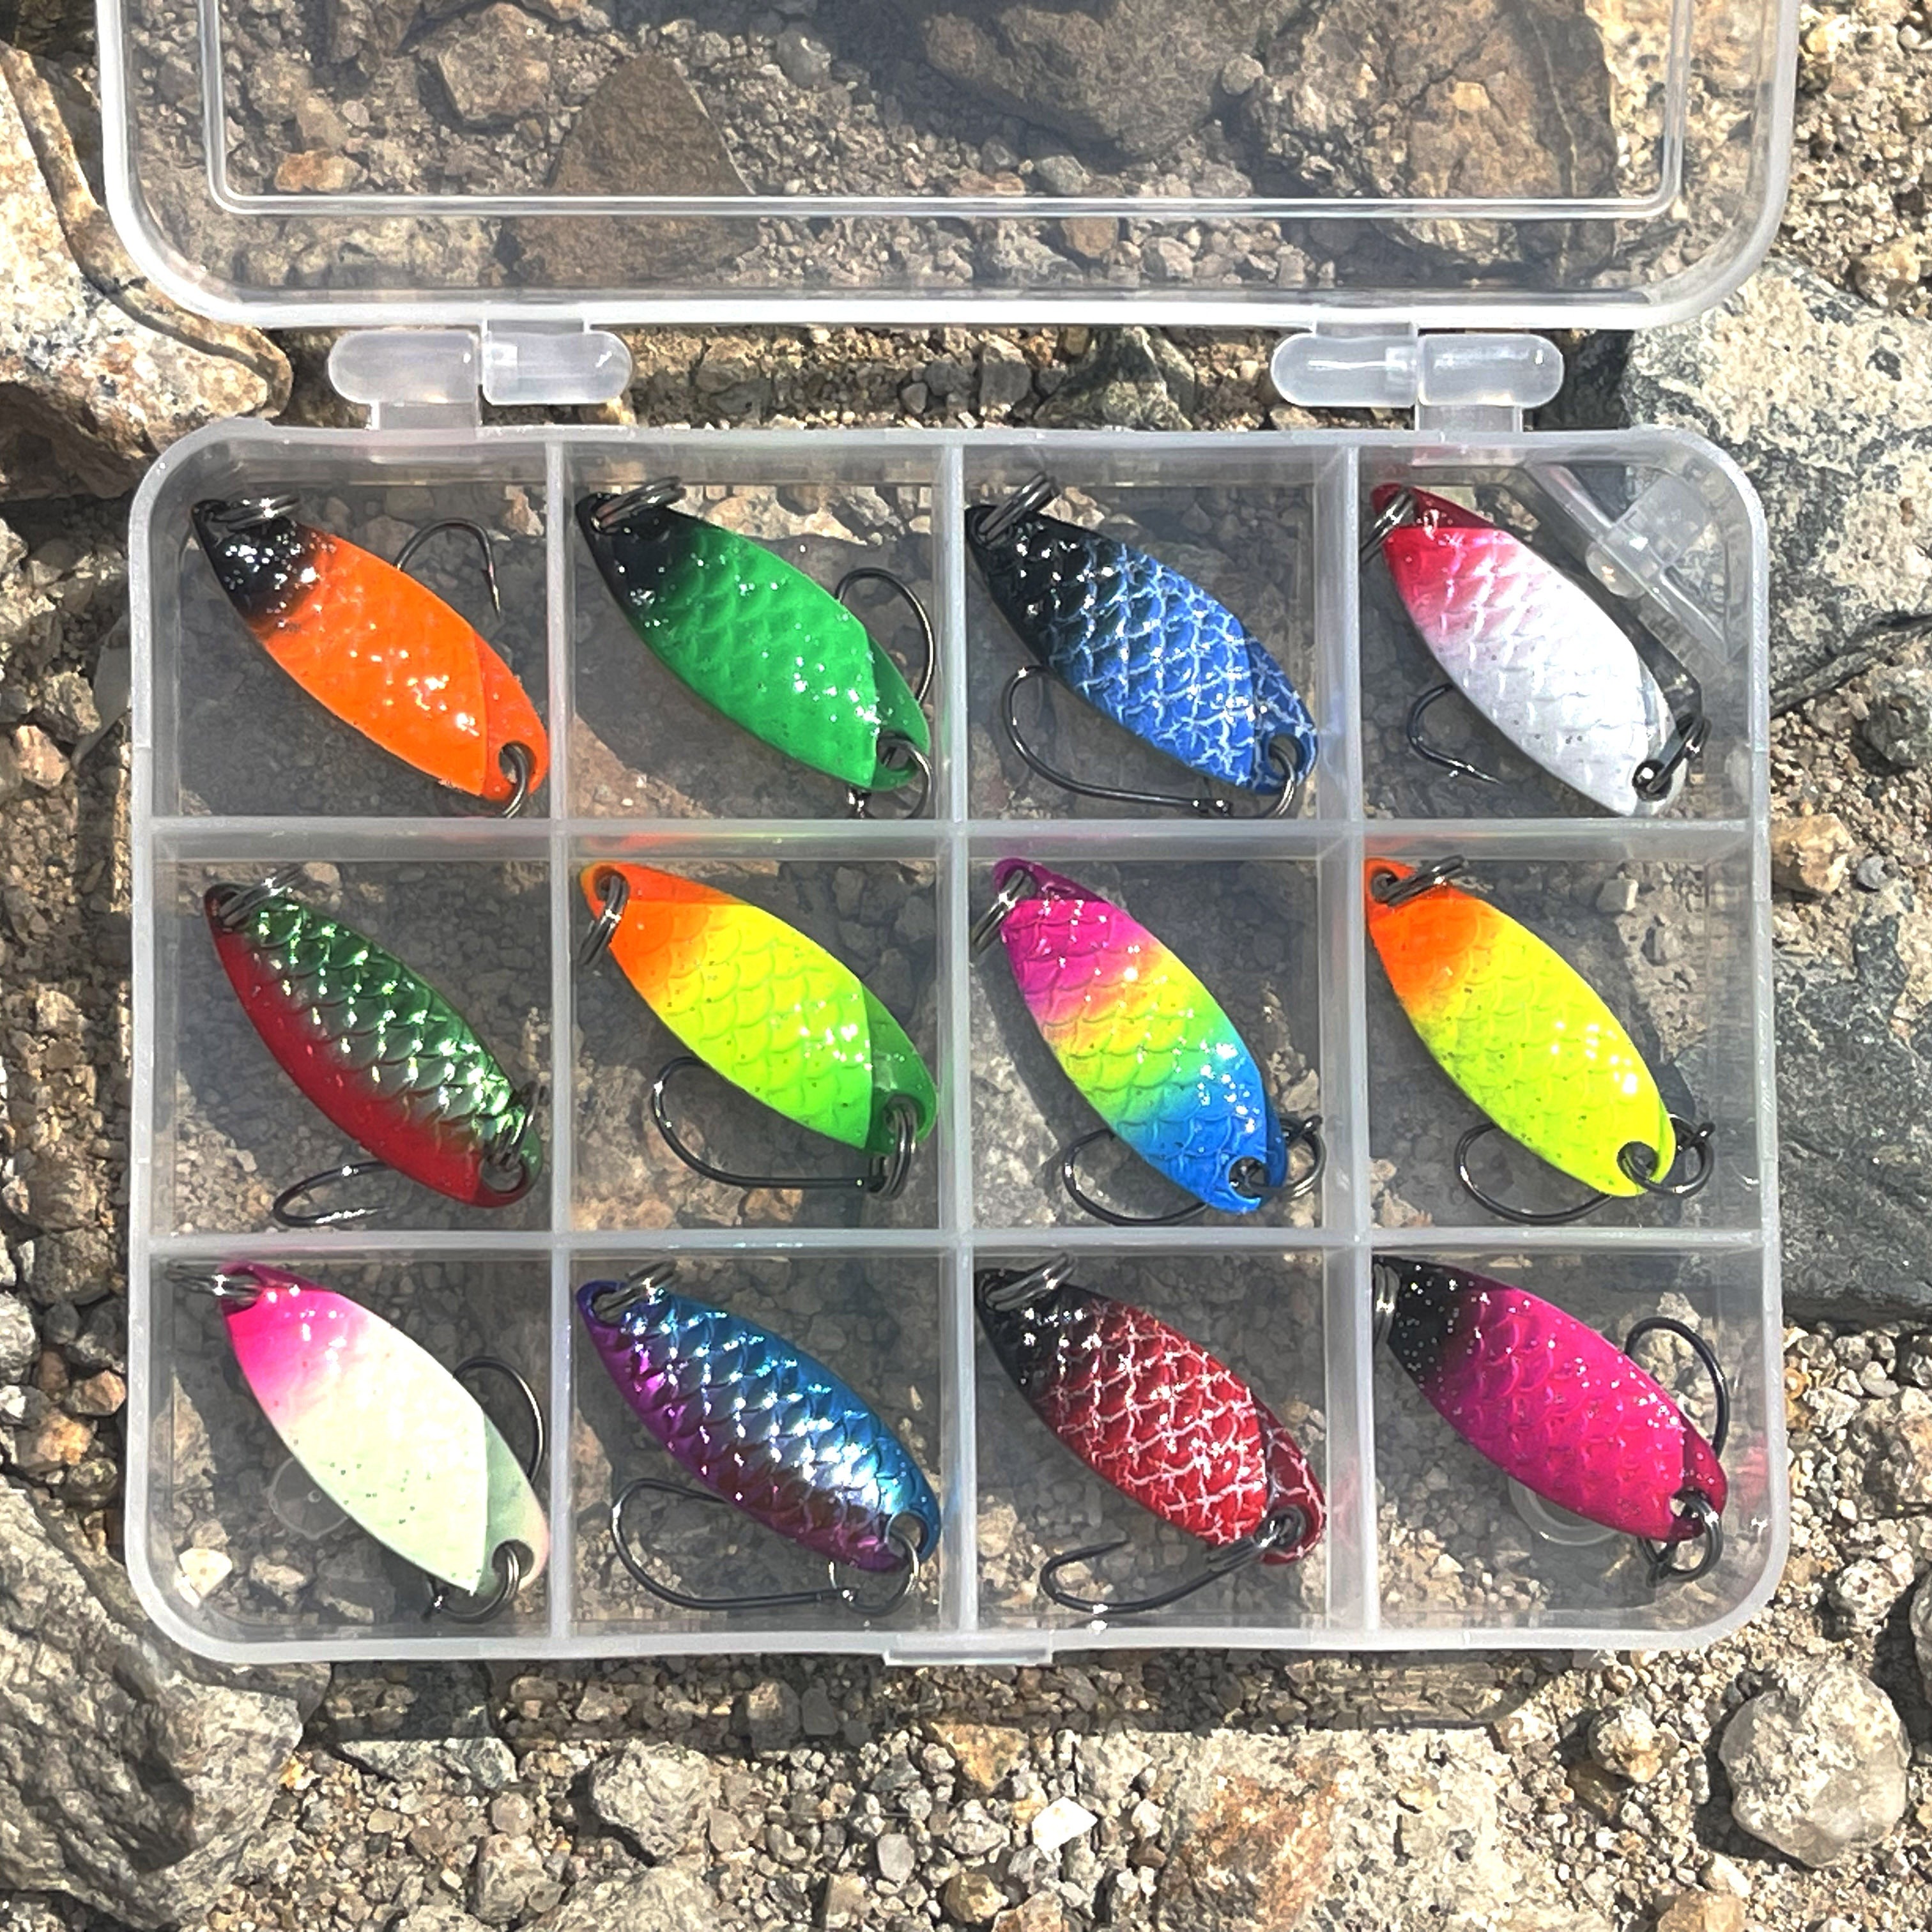 12pcs Fishing Bait with Small Sequin, Spoon Shaped Lure, Colorful Fishing  Tackles, 1.1inch/0.1oz